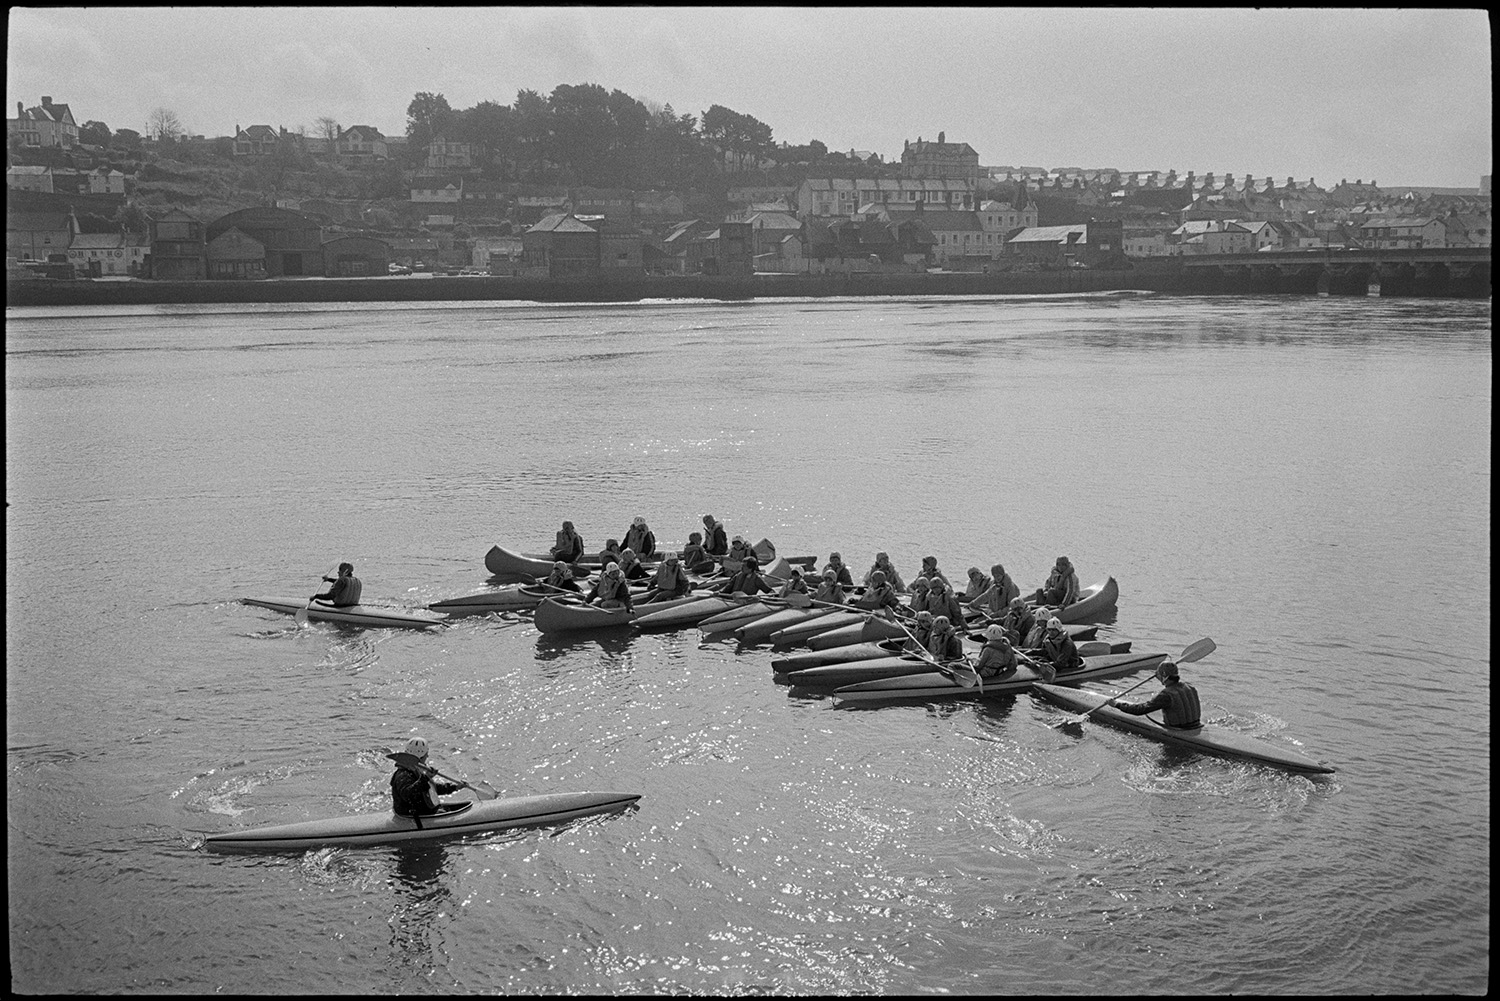 Canoeists on river, quayside capsized canoe! Houses on waterfront. <br />
[People having a canoeing lesson on the River Torridge by Bideford Long Bridge, also known as Bideford Old Bridge. Houses can be seen along the waterfront in the background.]